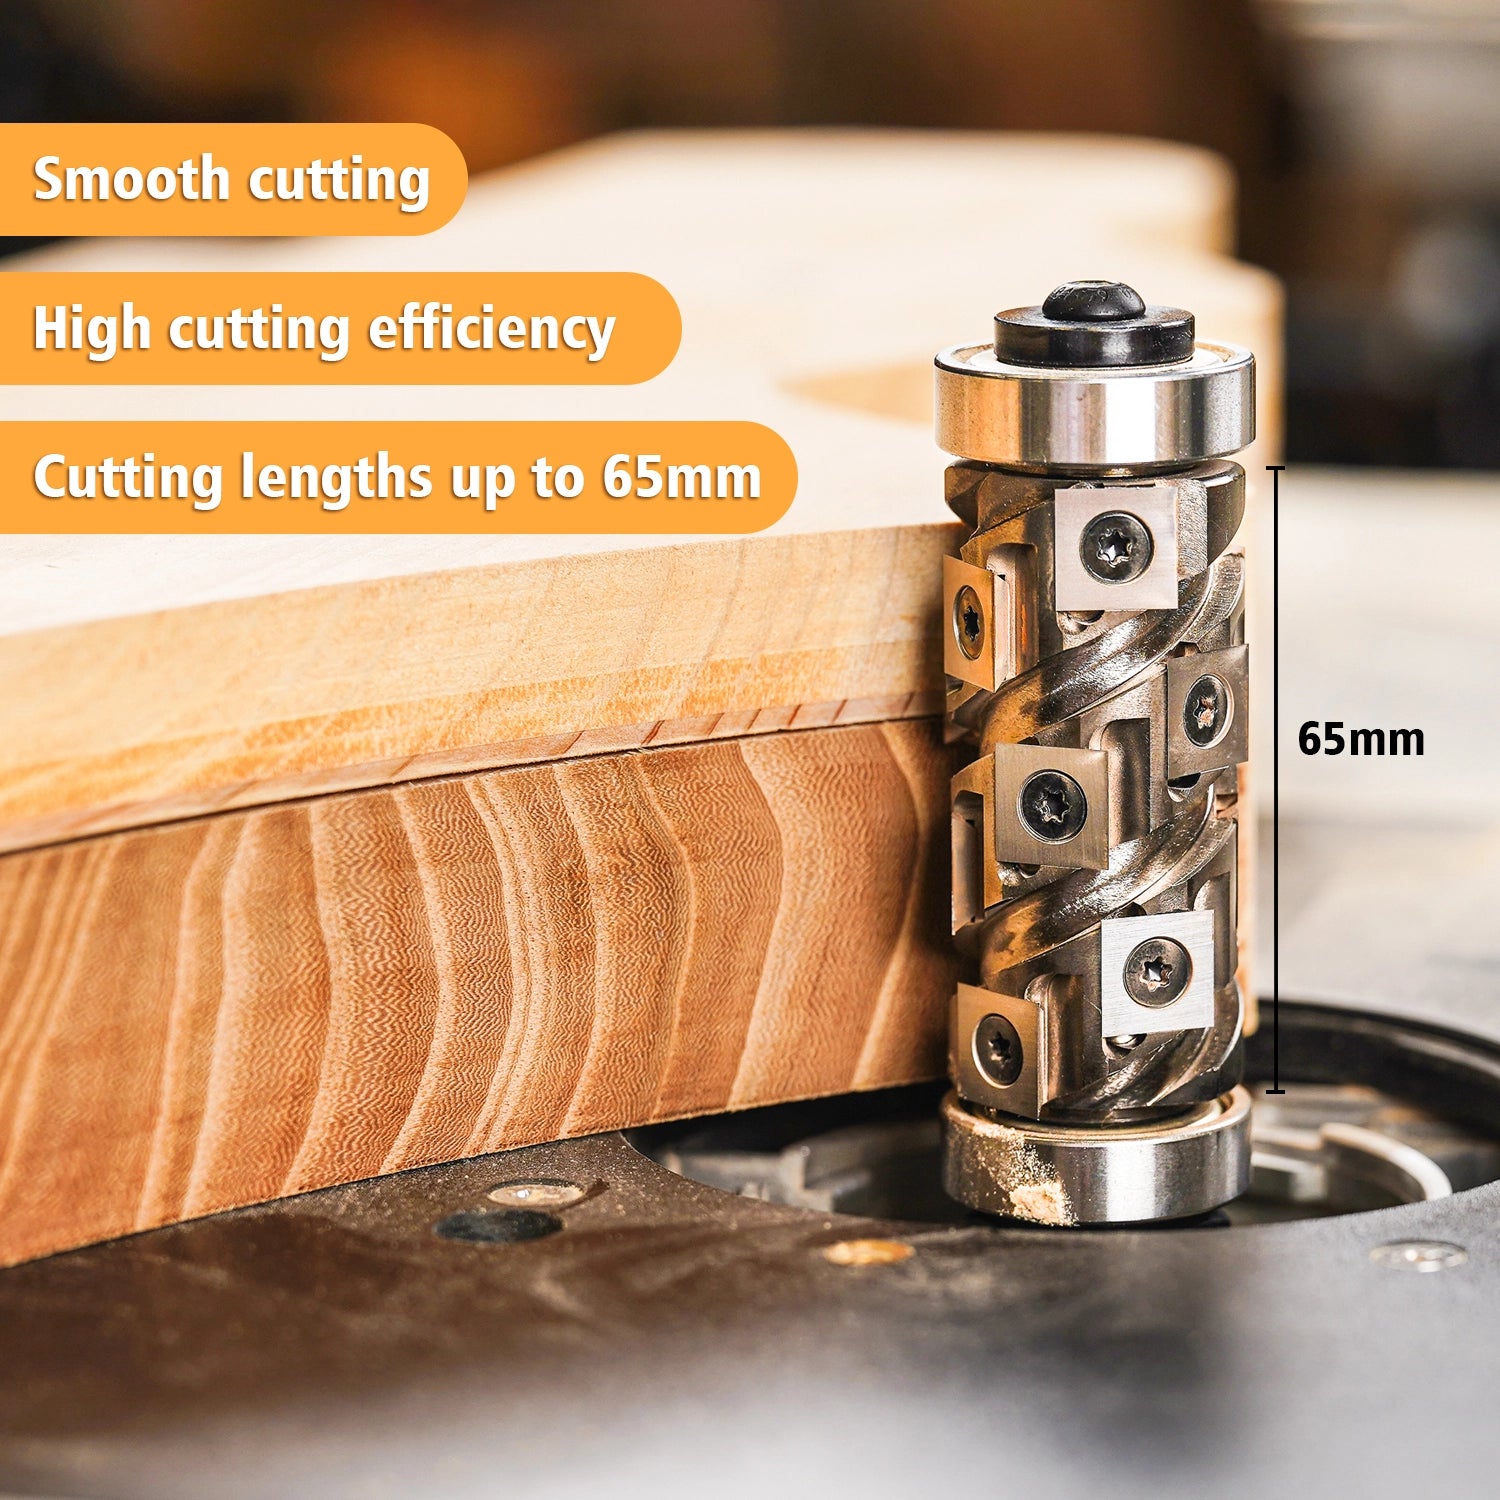 SpeTool UK Ranger Series W07020 Carbide Insert Flush Trim with Top and Bottom Double Bearings 32mm Dia x 1/2" Shank x 65mm Cutting Length x 5" Long Pattern Template Router Bit